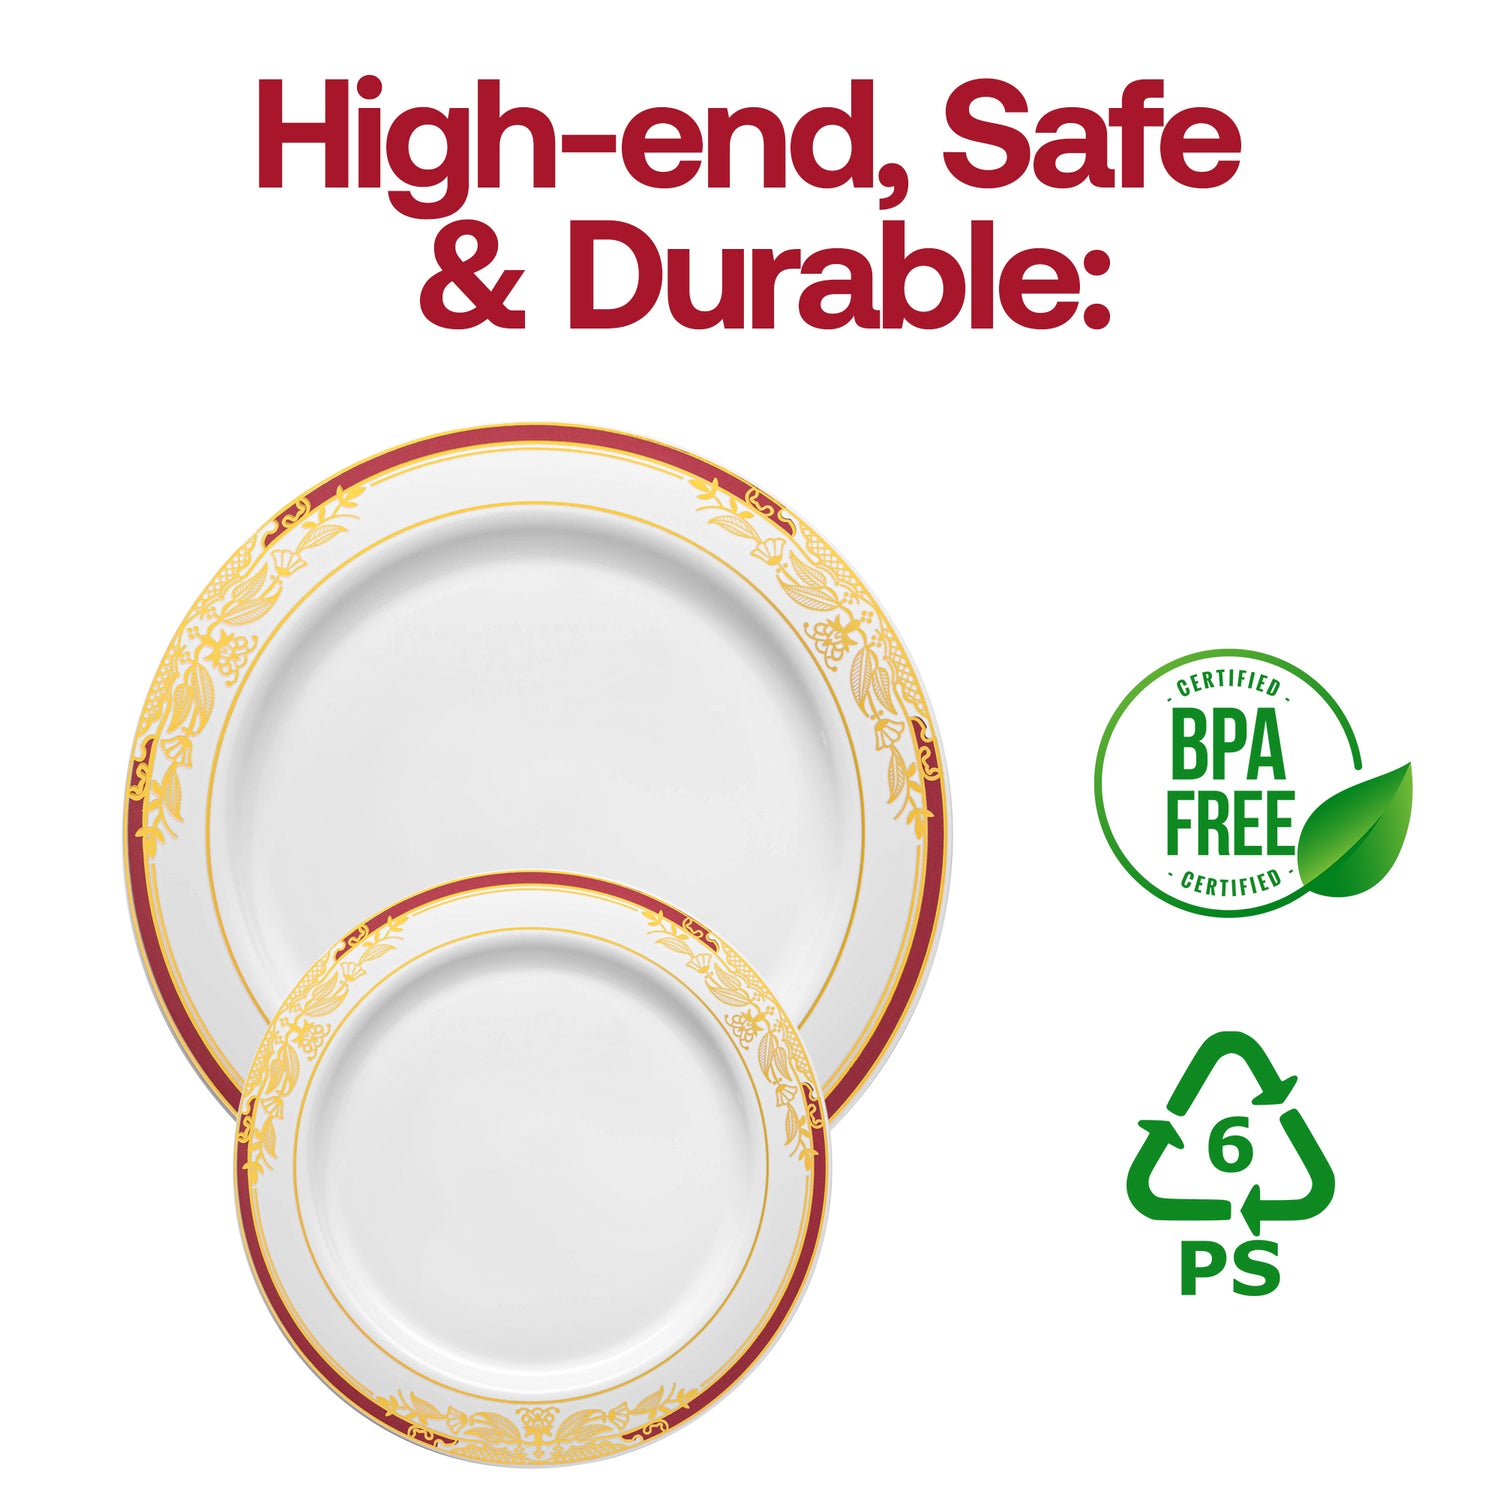 White with Burgundy and Gold Harmony Rim Plastic Appetizer/Salad Plates (7.5") BPA | The Kaya Collection